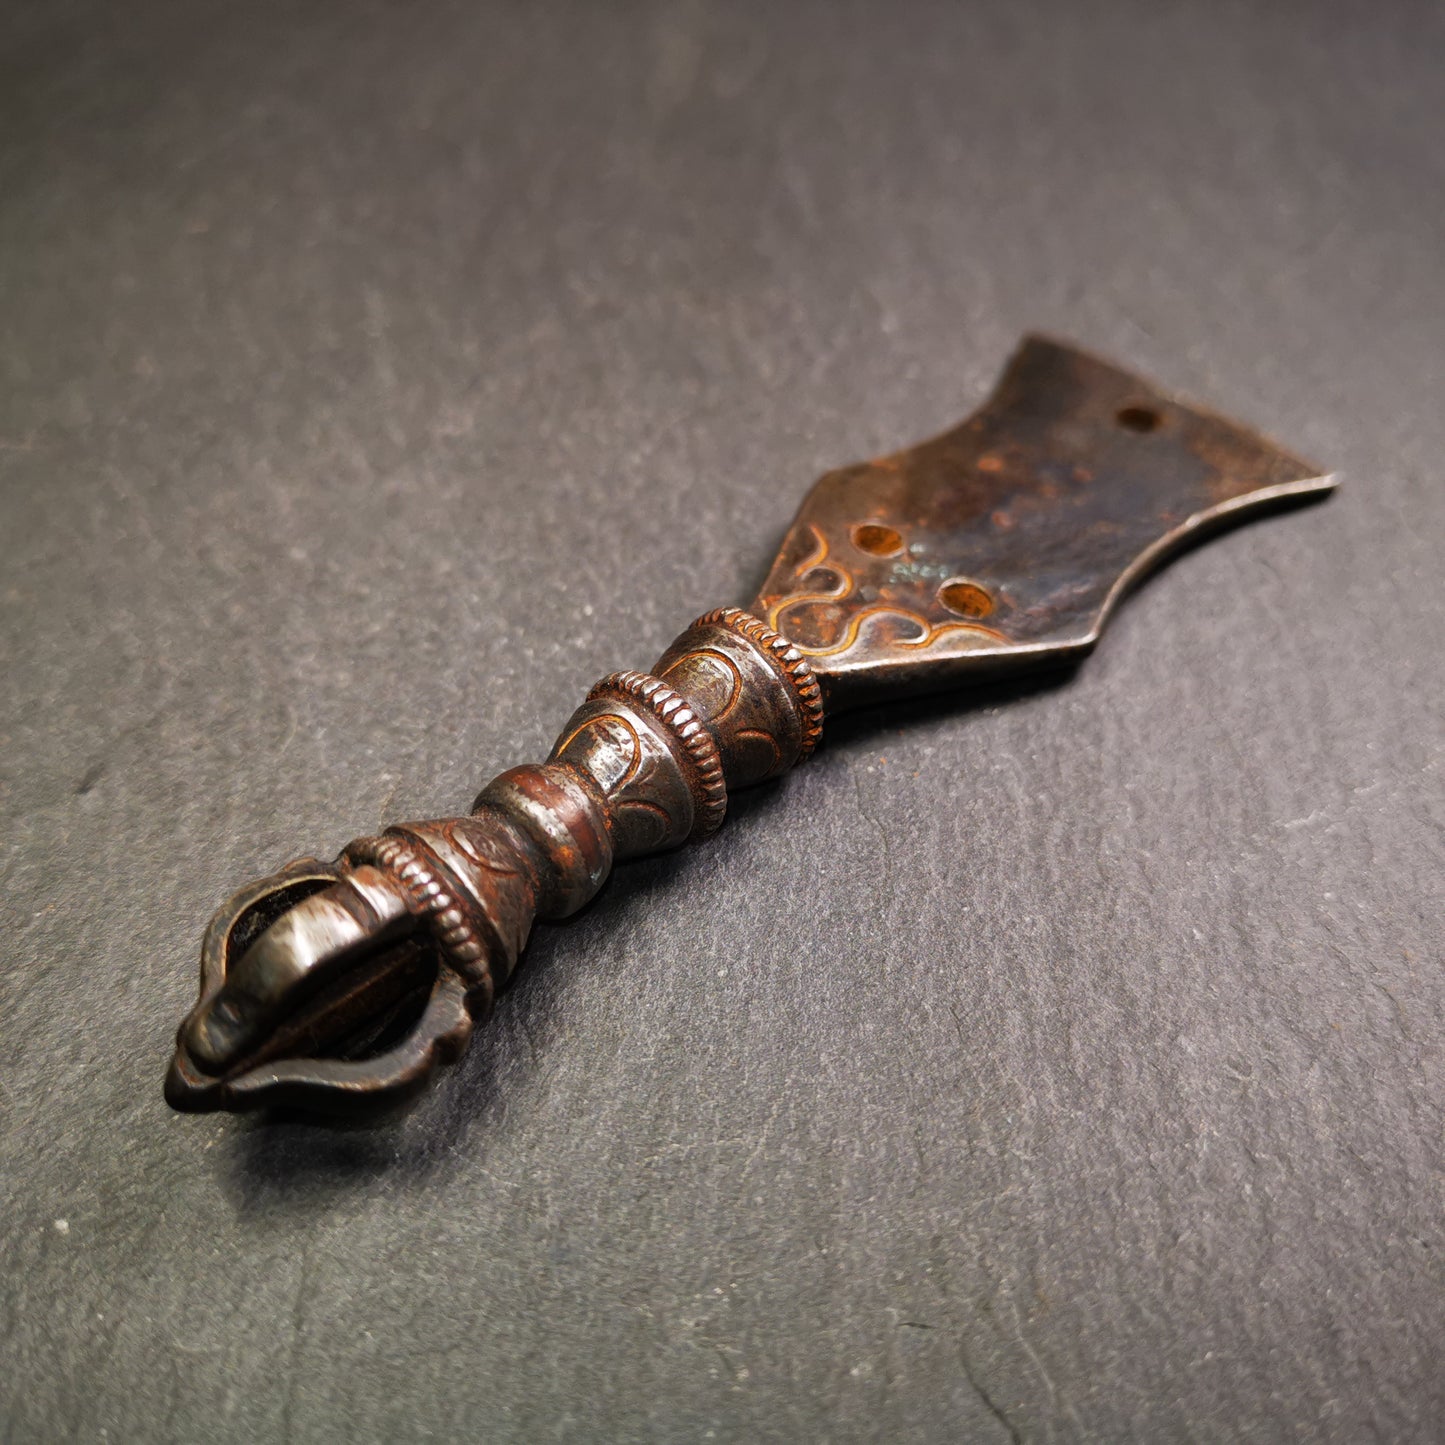 This old handmade kartika was handmade by Tibetan craftsmen. It is made of cold iron,inlaid copper wire, blcak color,the upper part is a half vajra, and the lower part is a flat kartika knife,3.9 inches long.